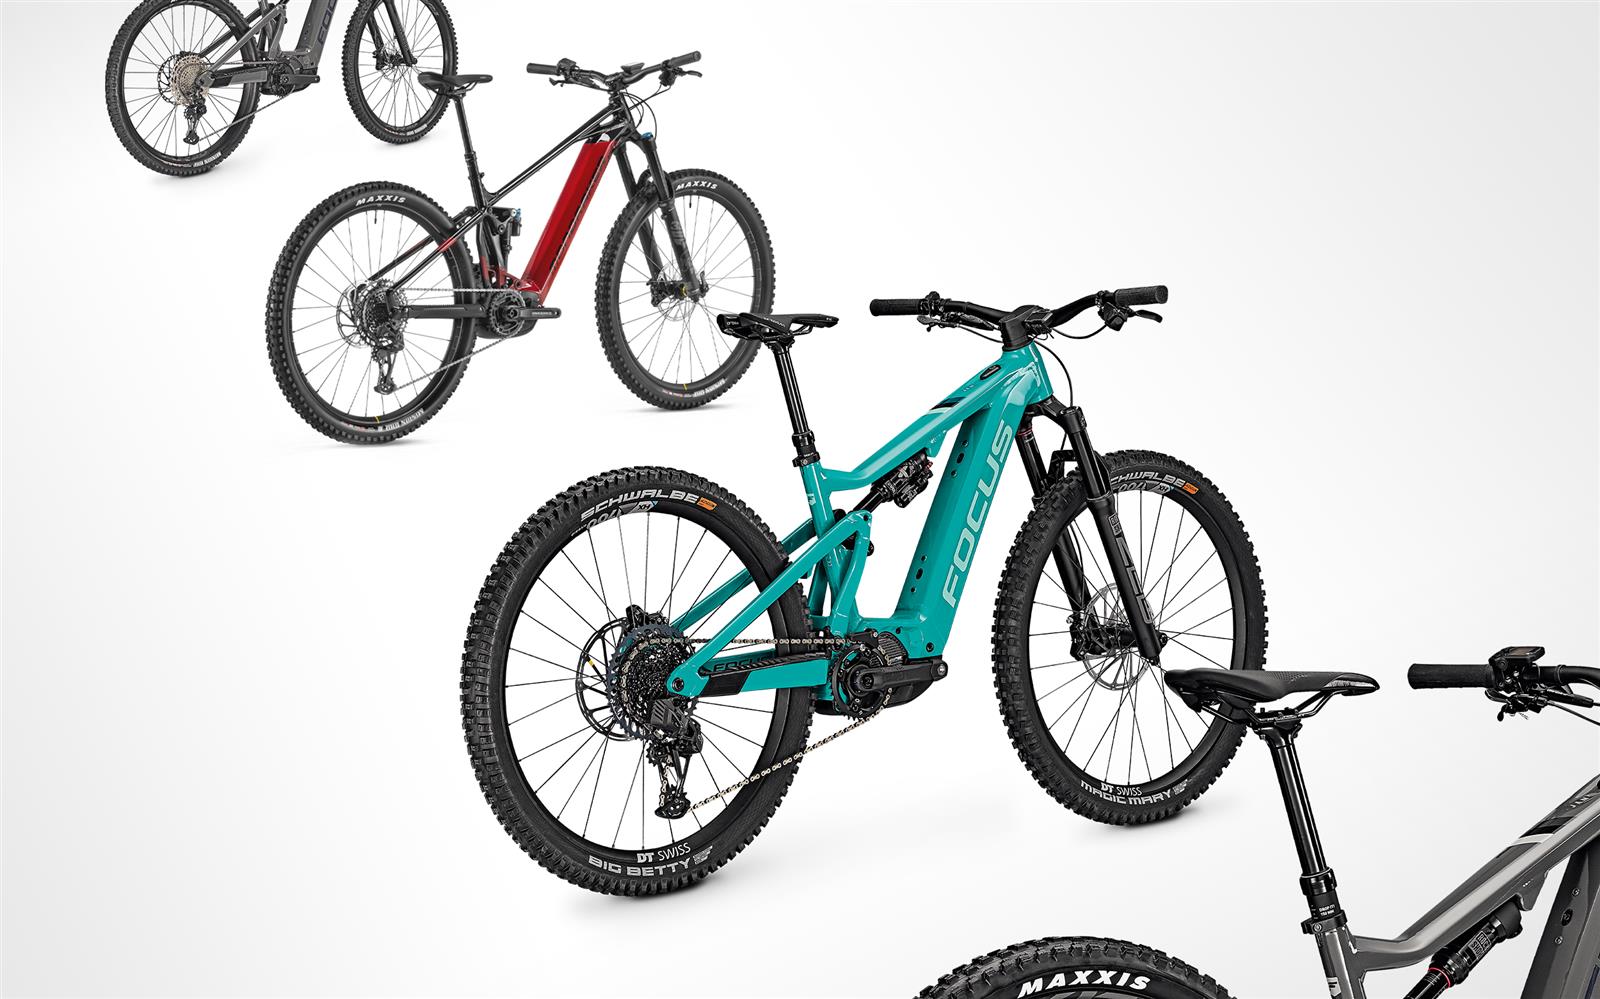 The new 2022 e-bike collection